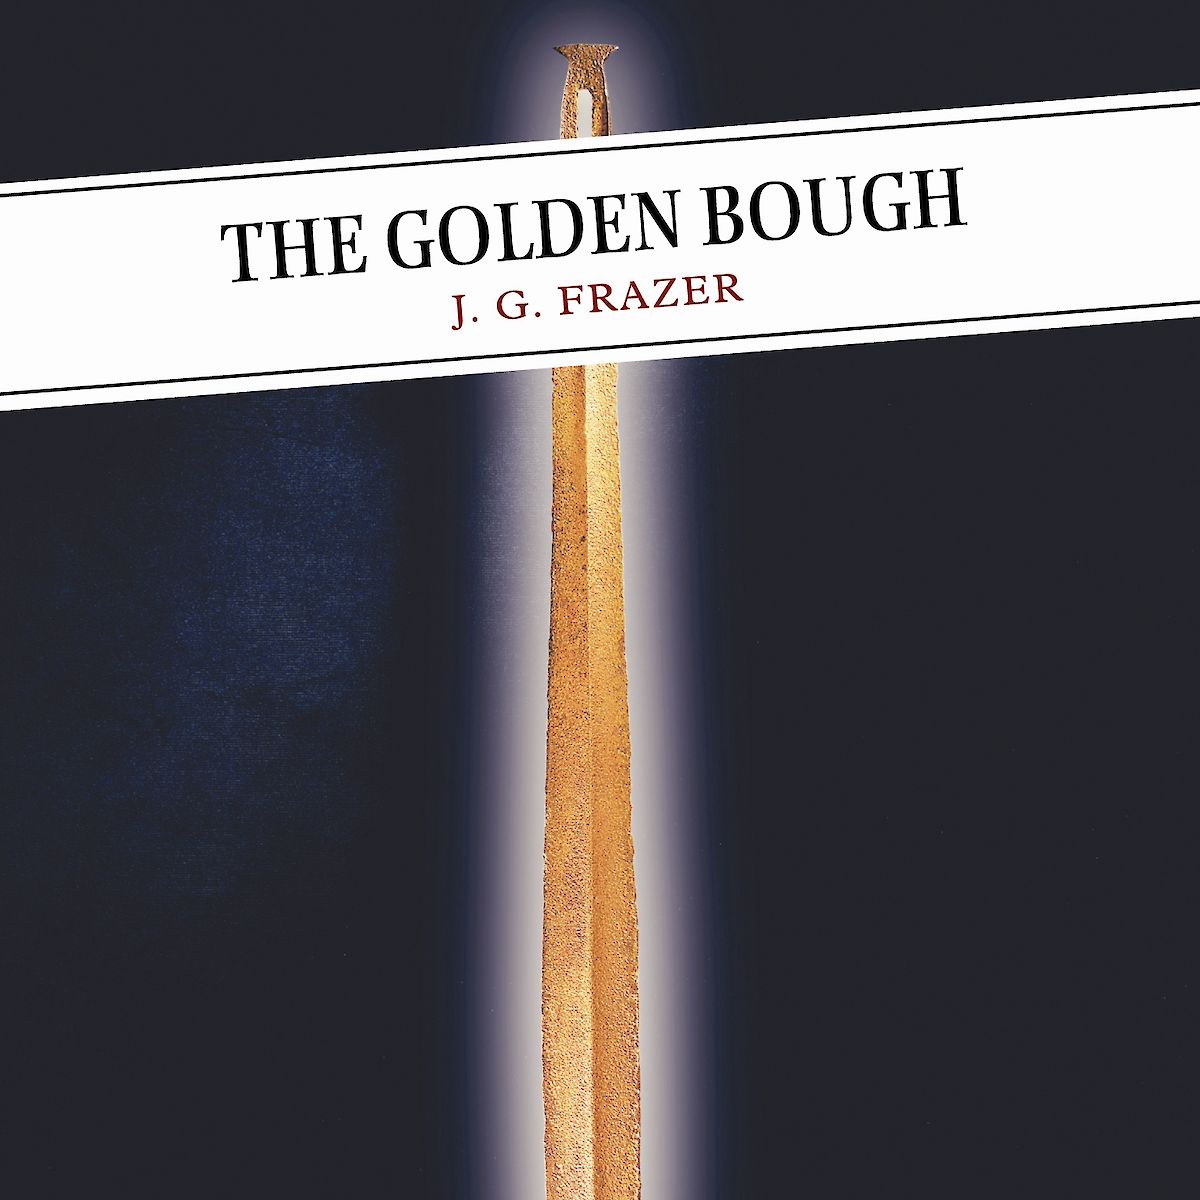 The Golden Bough - A Study in Comparative Religion by J.G. Frazer 